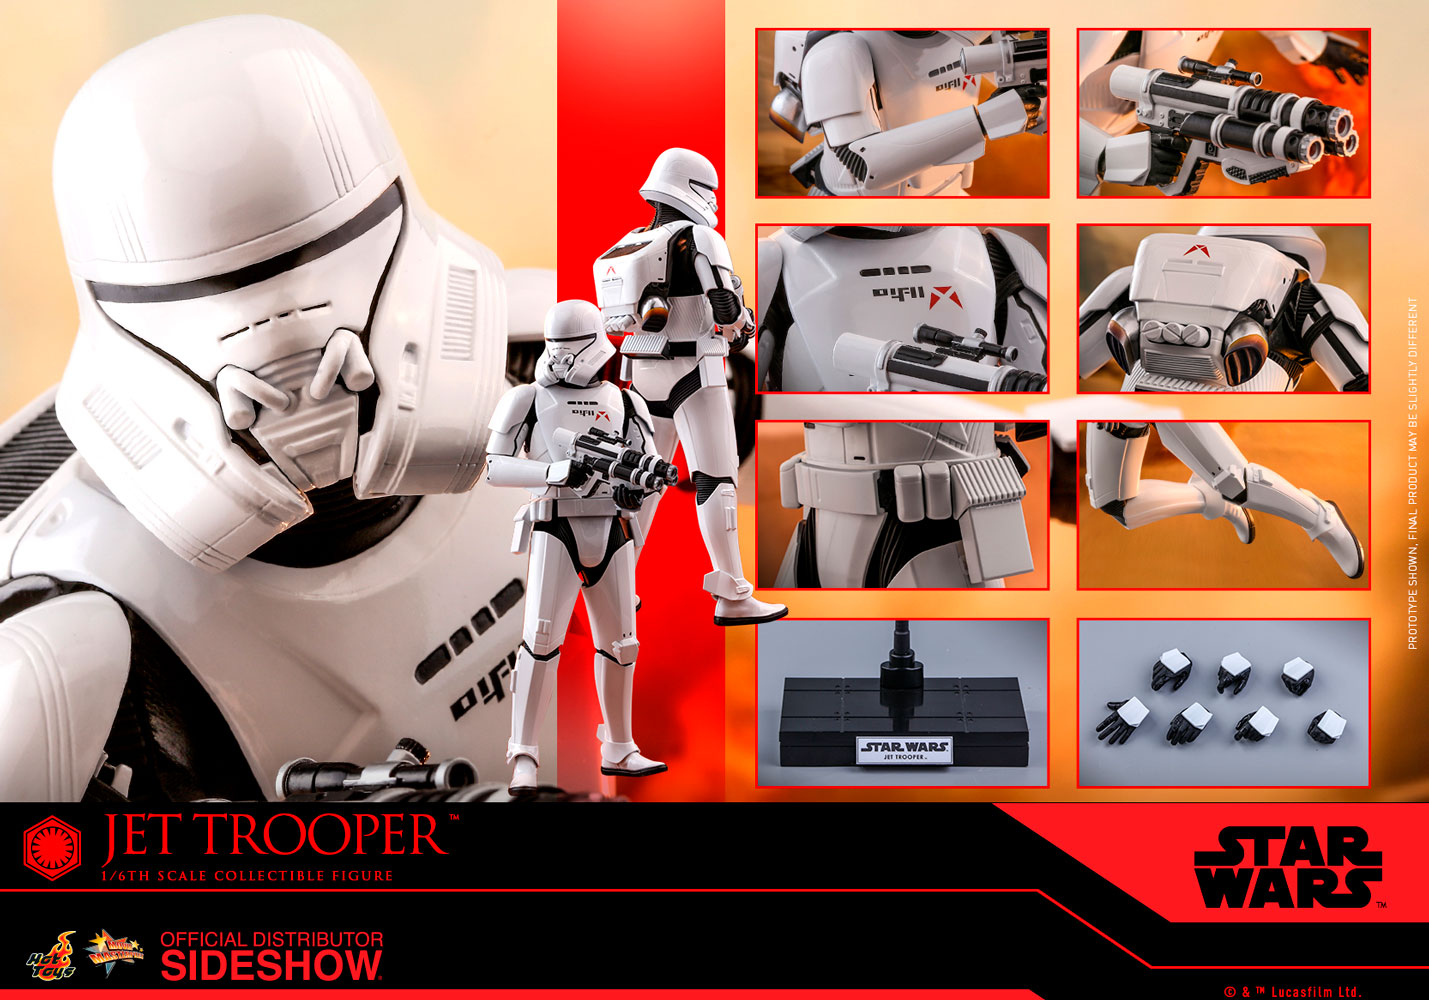 Hot Toys 1/6 Star Wars Episode IX The Rise of Skywalker Jet Trooper MMS561 Sixth Scale Figure